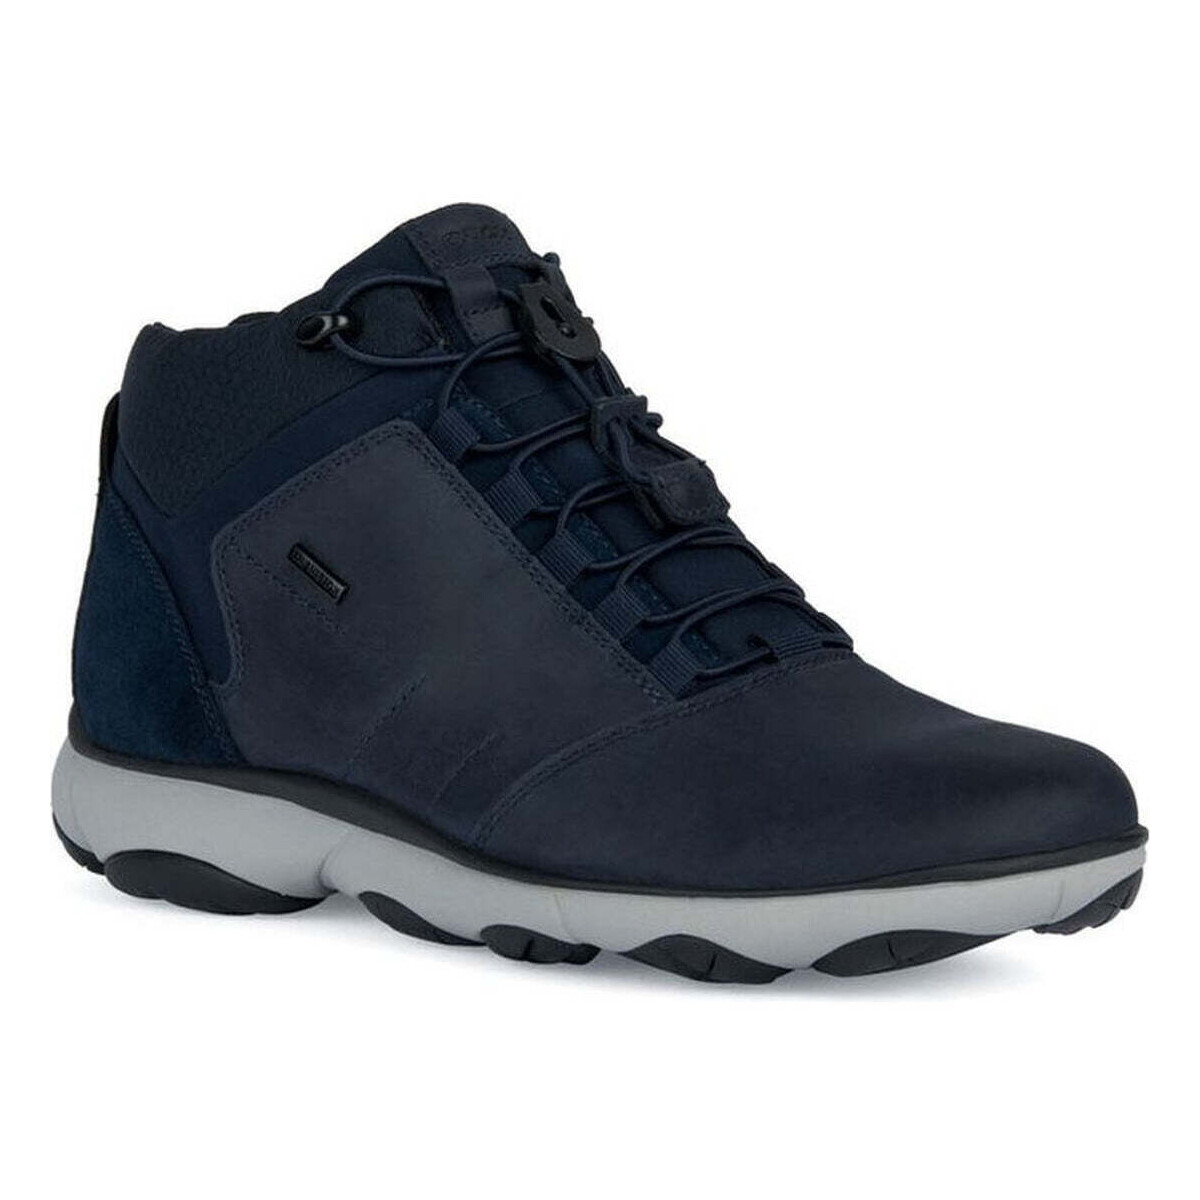 Chaussures Homme Boots Geox nebula 4 x 4 abx booties Bleu